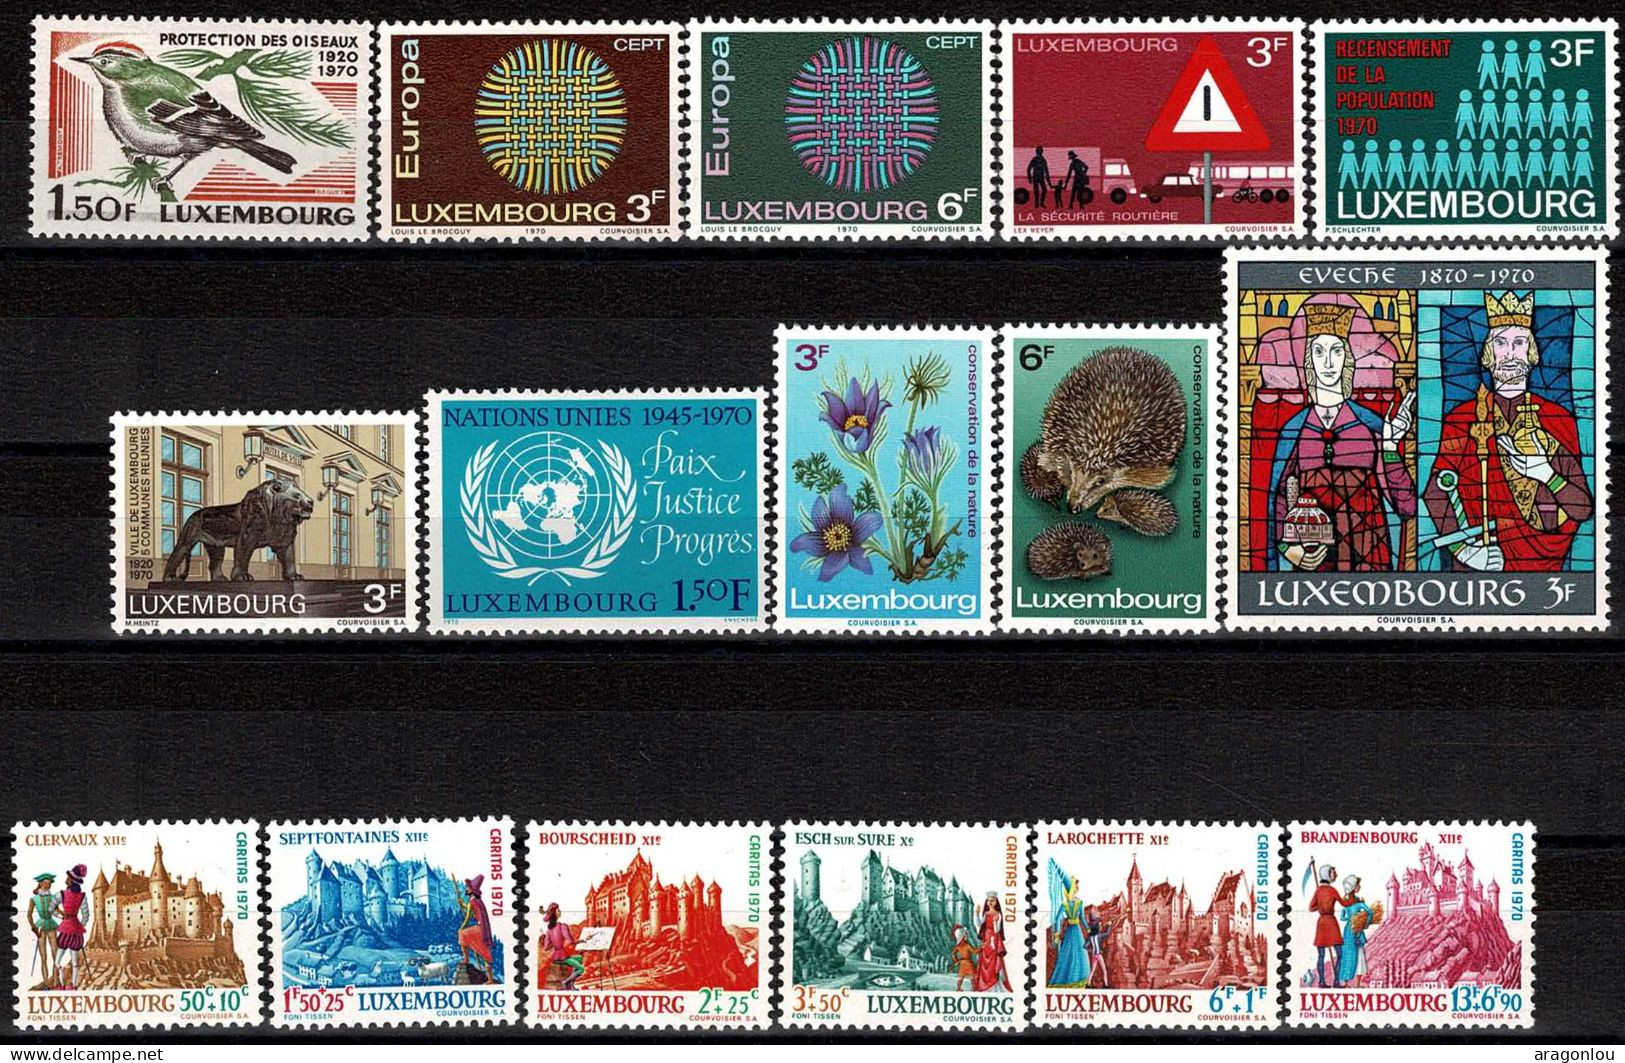 Luxembourg, Luxemburg 1970 Année Complête 9 Séries Neuf MNH** - Años Completos